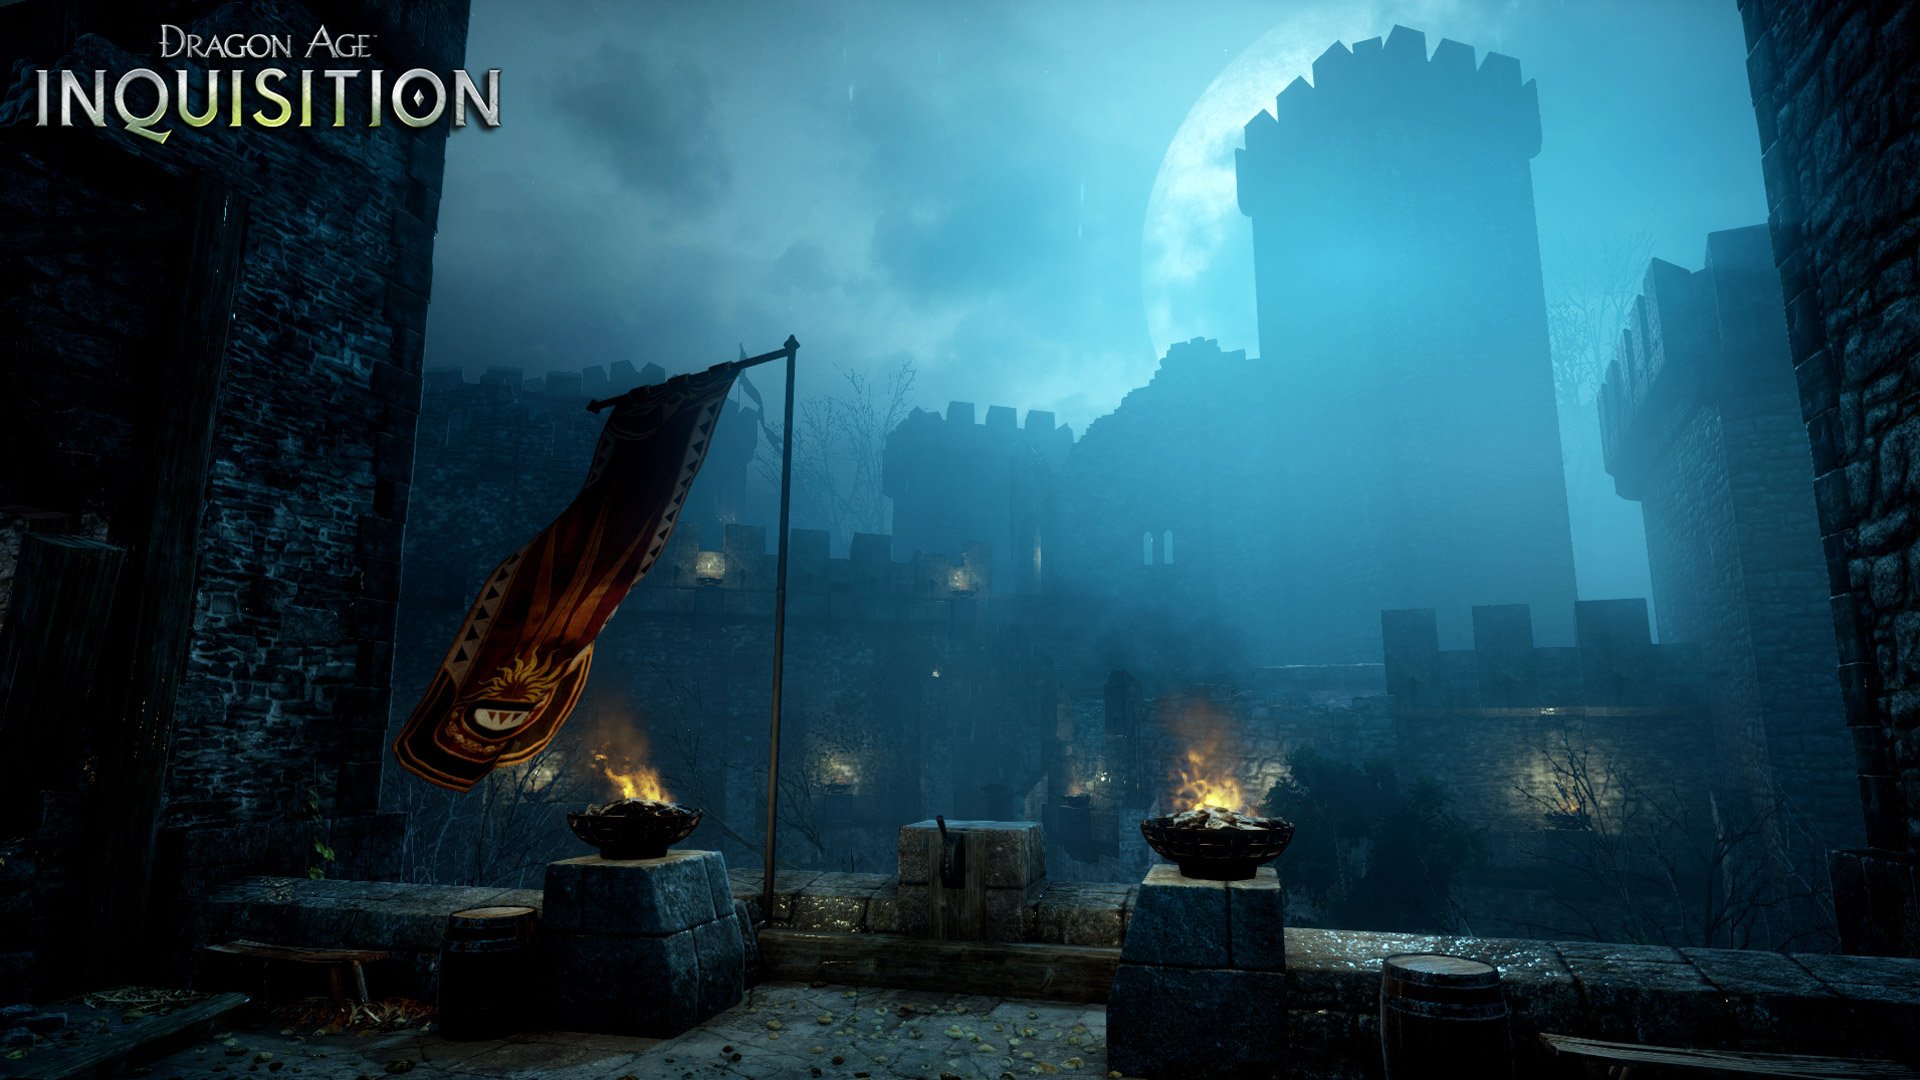 Free Dragon Age Inquisition Wallpaper in 1920x1080